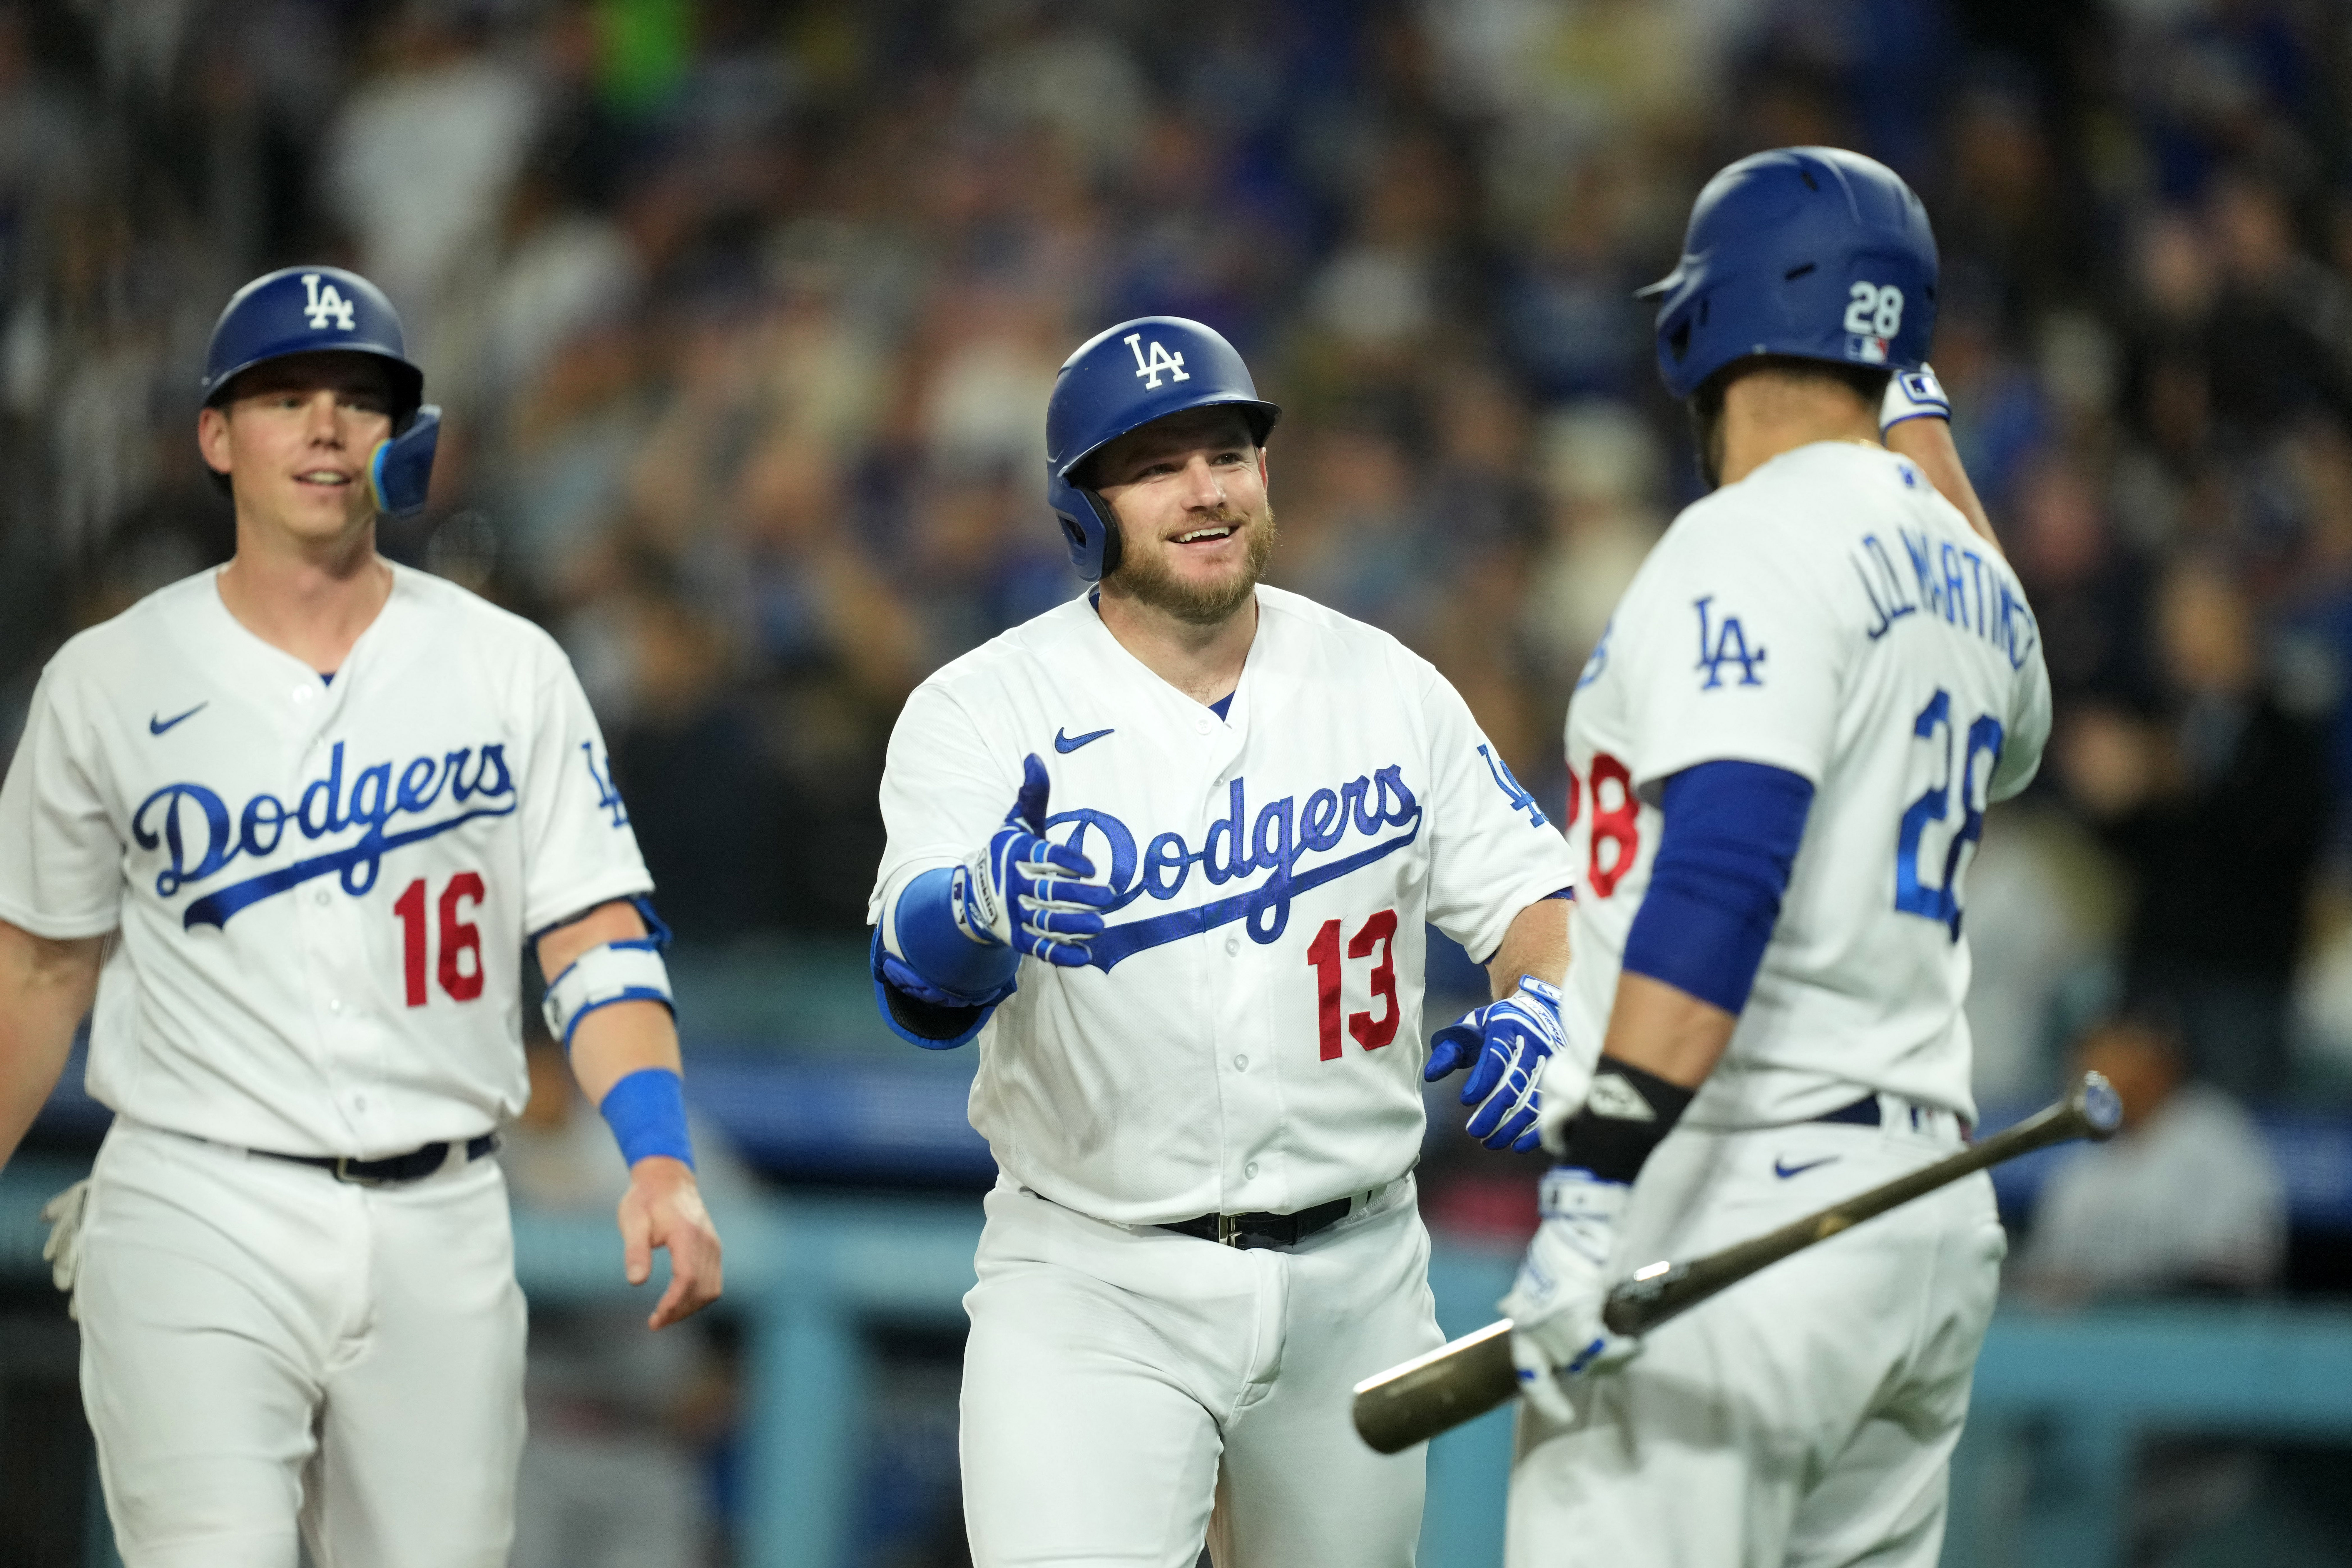 Dodgers win in 12th on bases-loaded walk against Twins